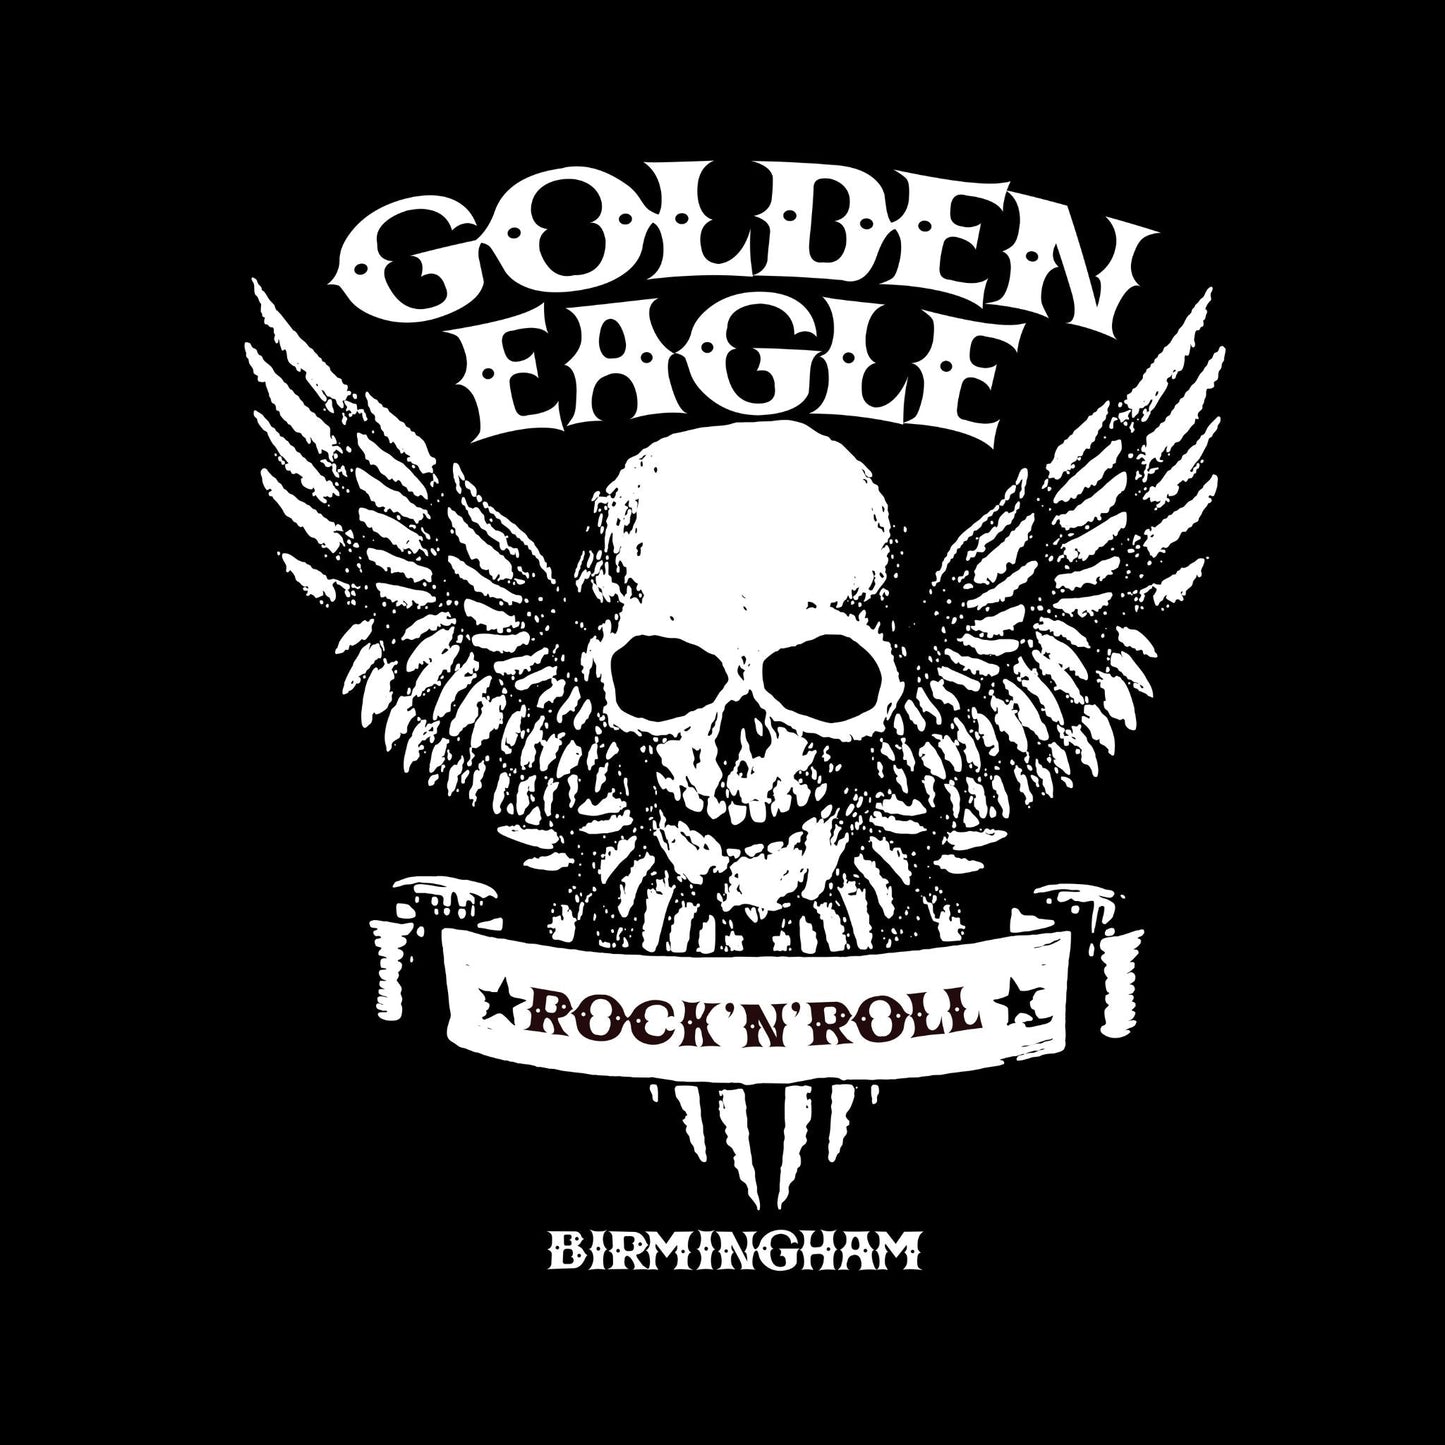 Golden Eagle skull/wings T-shirt - Dirty Stop Outs